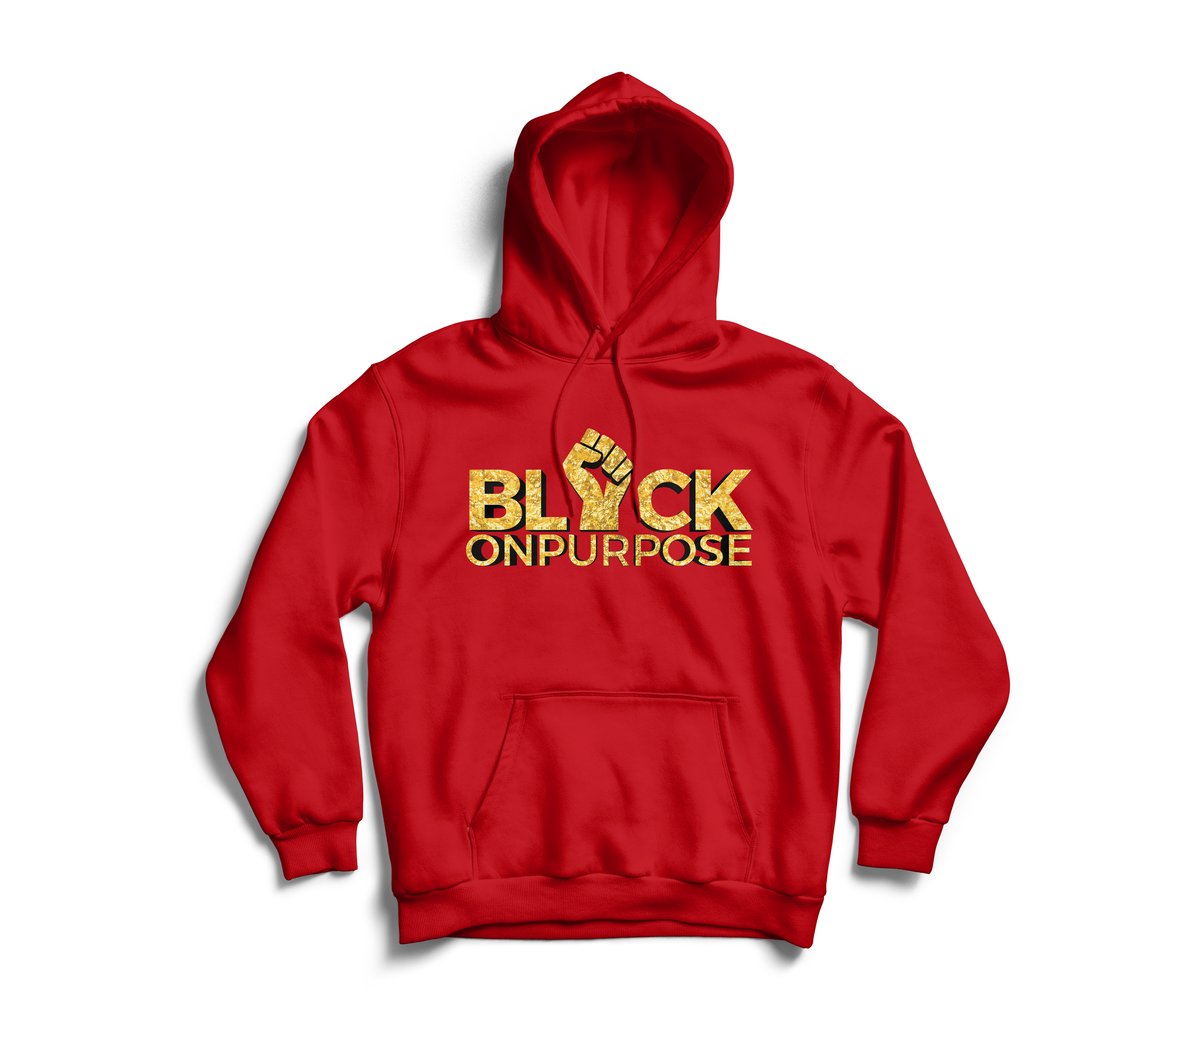 Image of Adult Red Gold "Black On Purpose" Hoodie